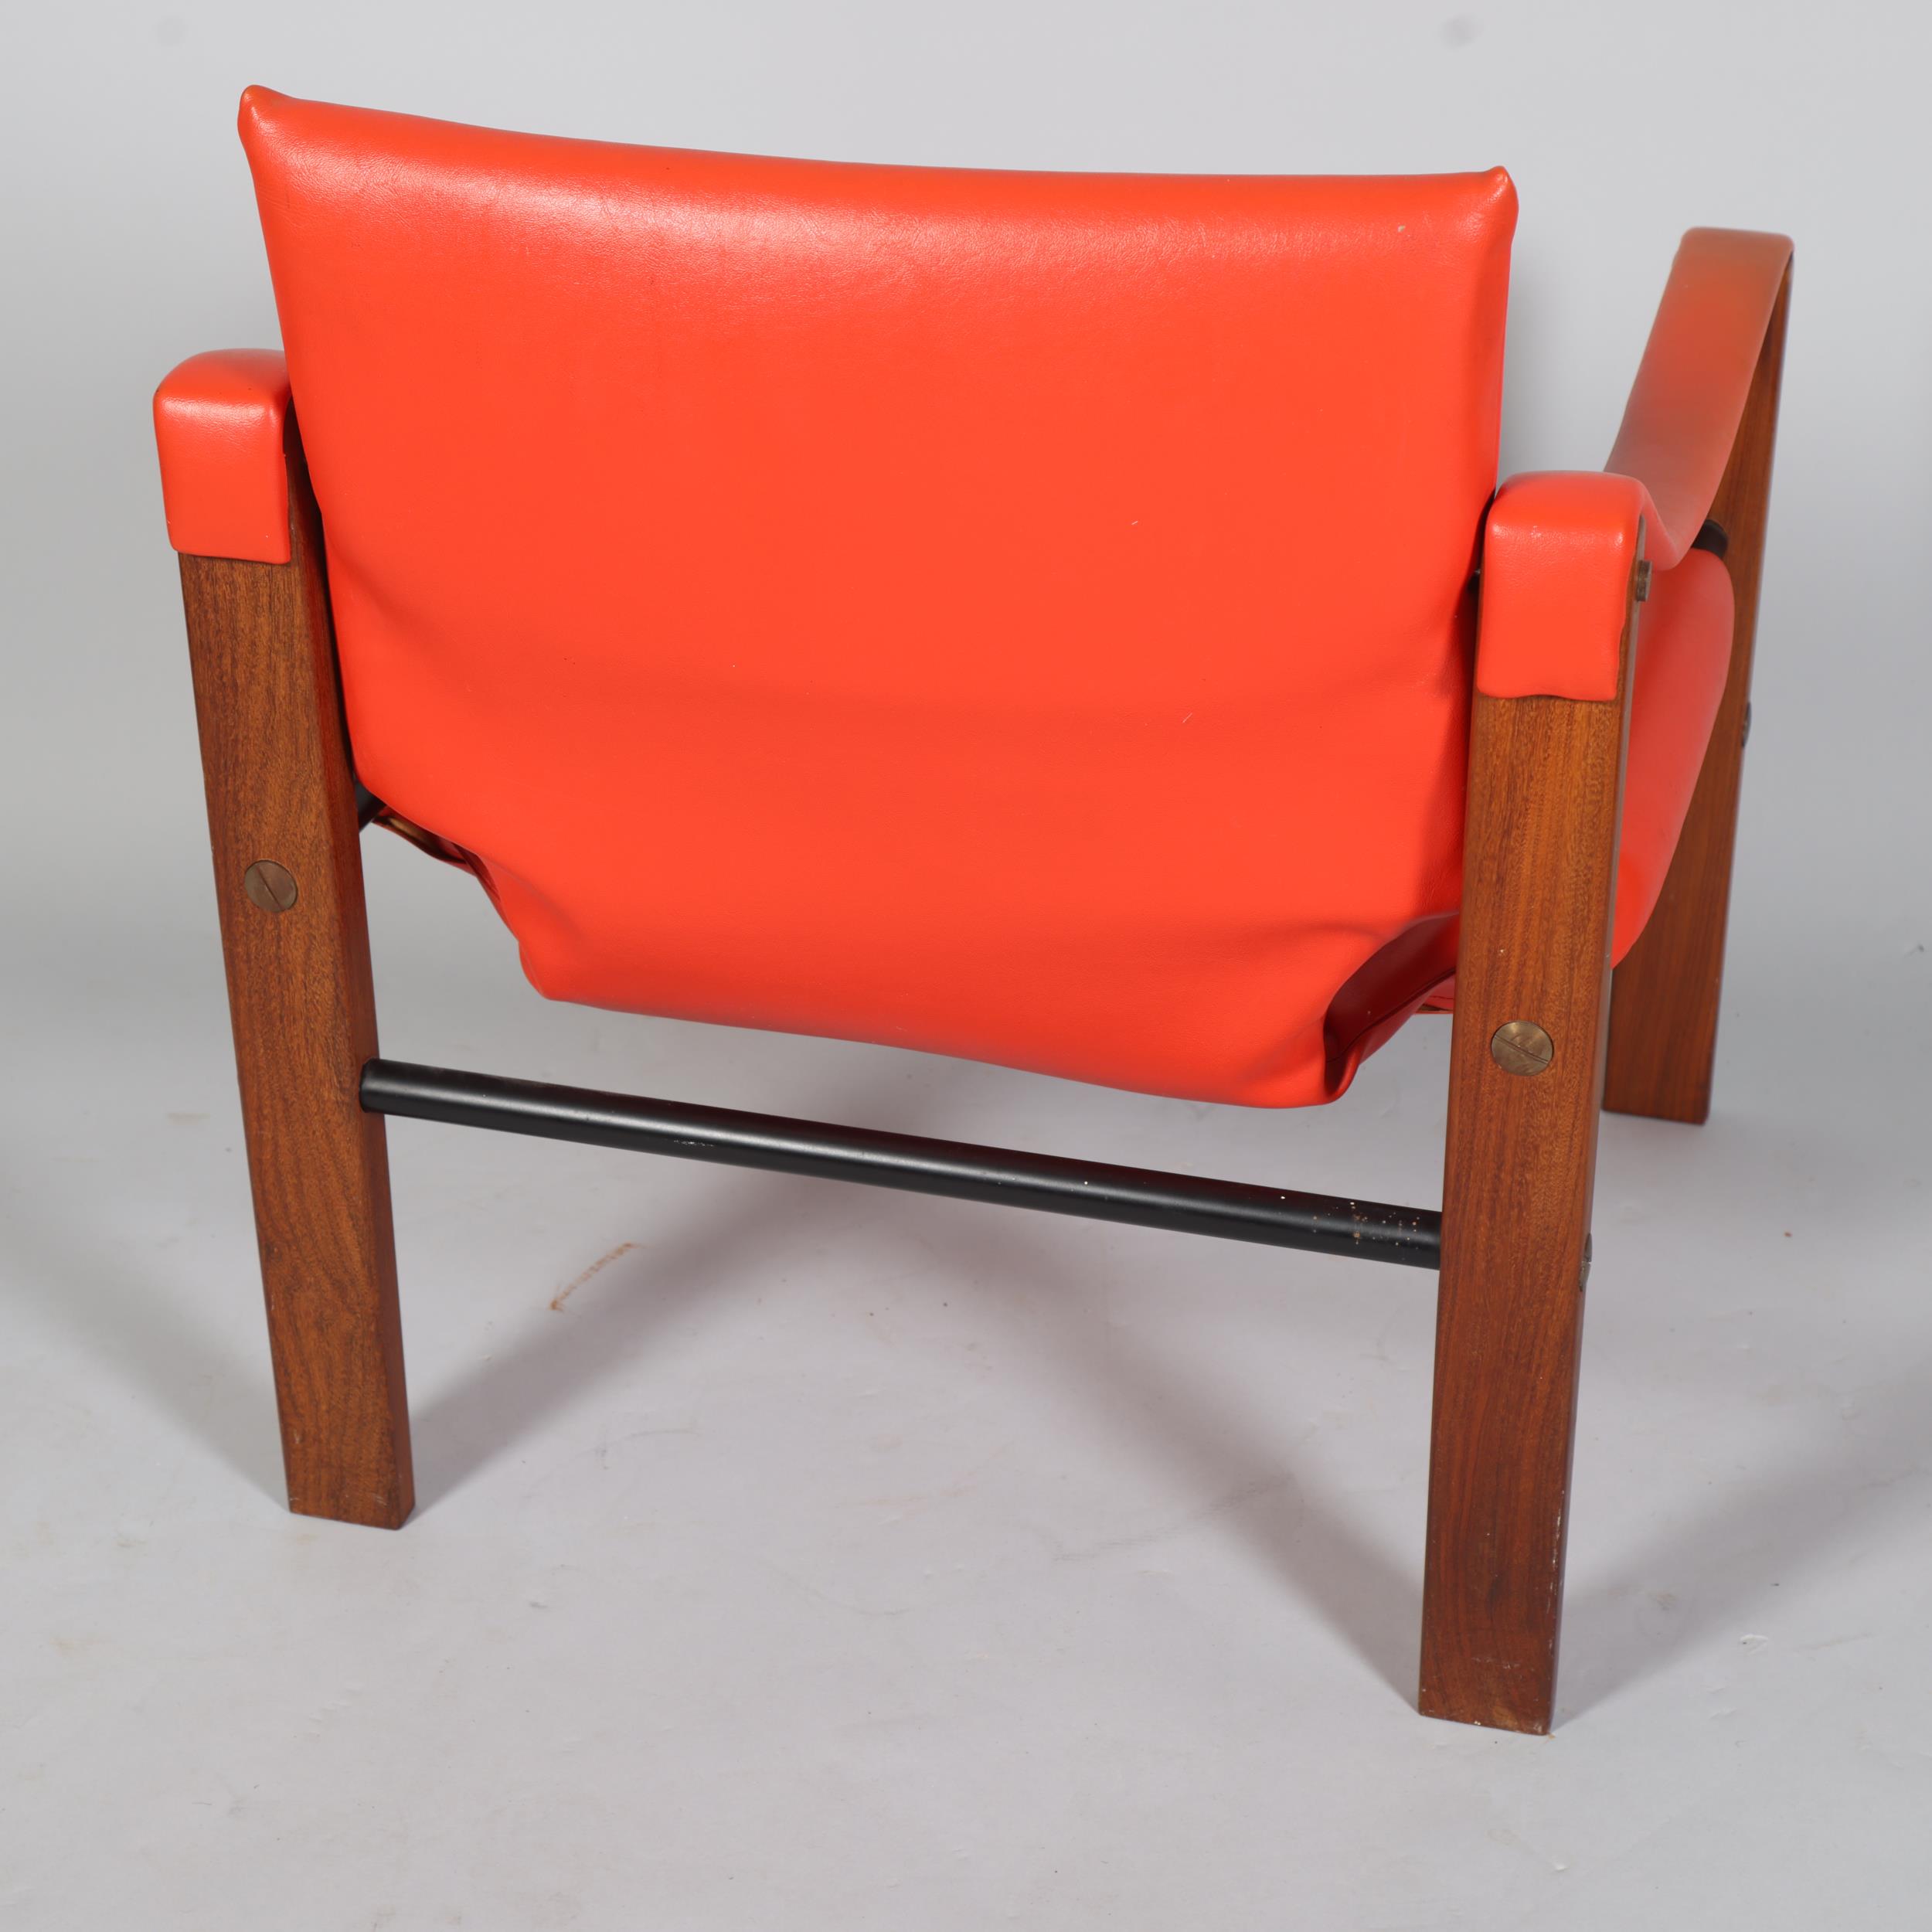 MAURICE BURKE for Arkana, a mid 20th century safari chair, red faux leather upholstery with hardwood - Image 4 of 4